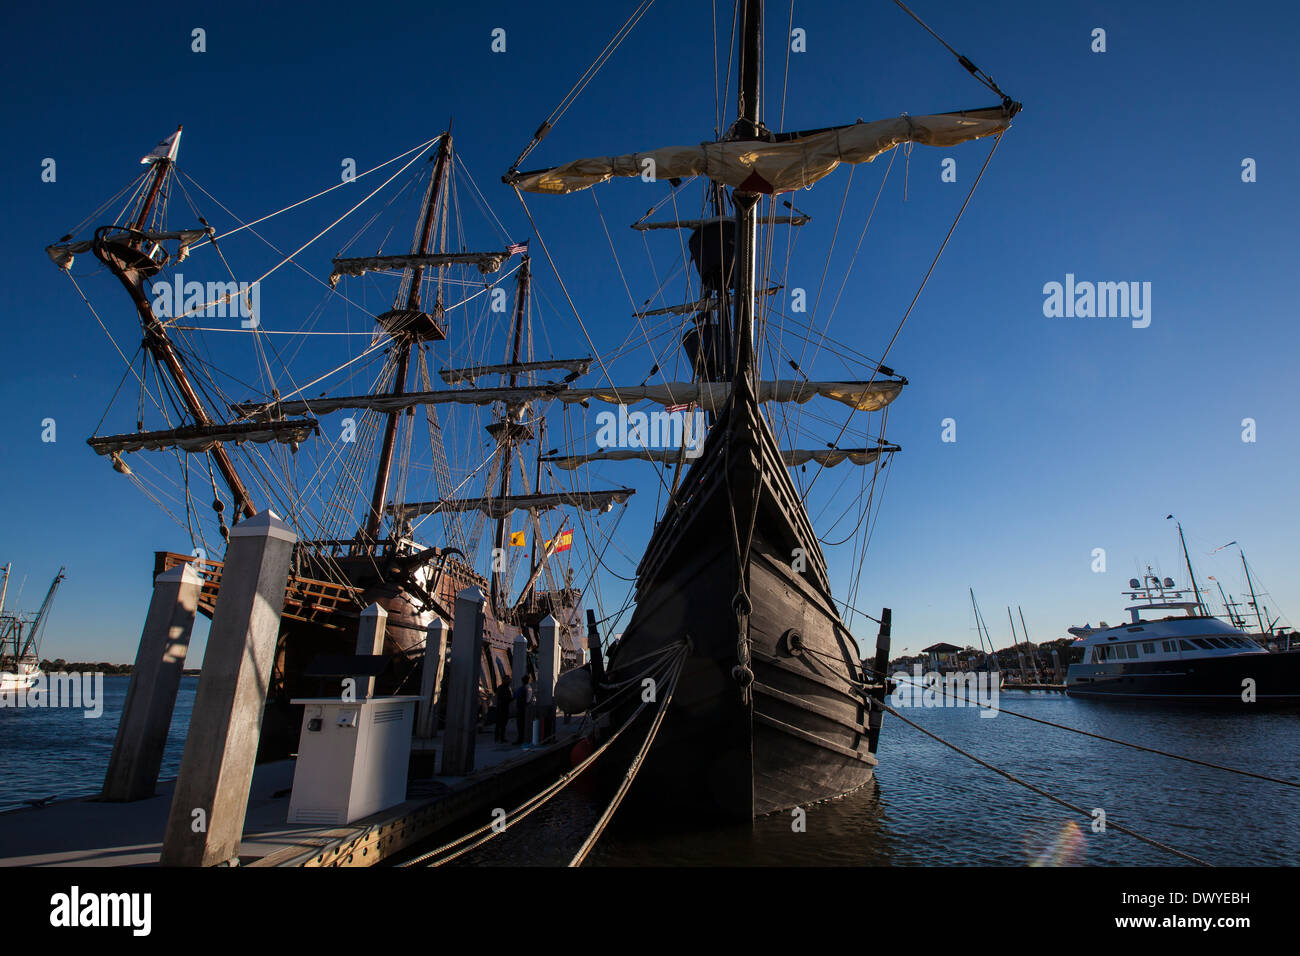 El Galeon Andalucia and Nao Victoria replica ships are pictured in St. Augustine, Florida Stock Photo